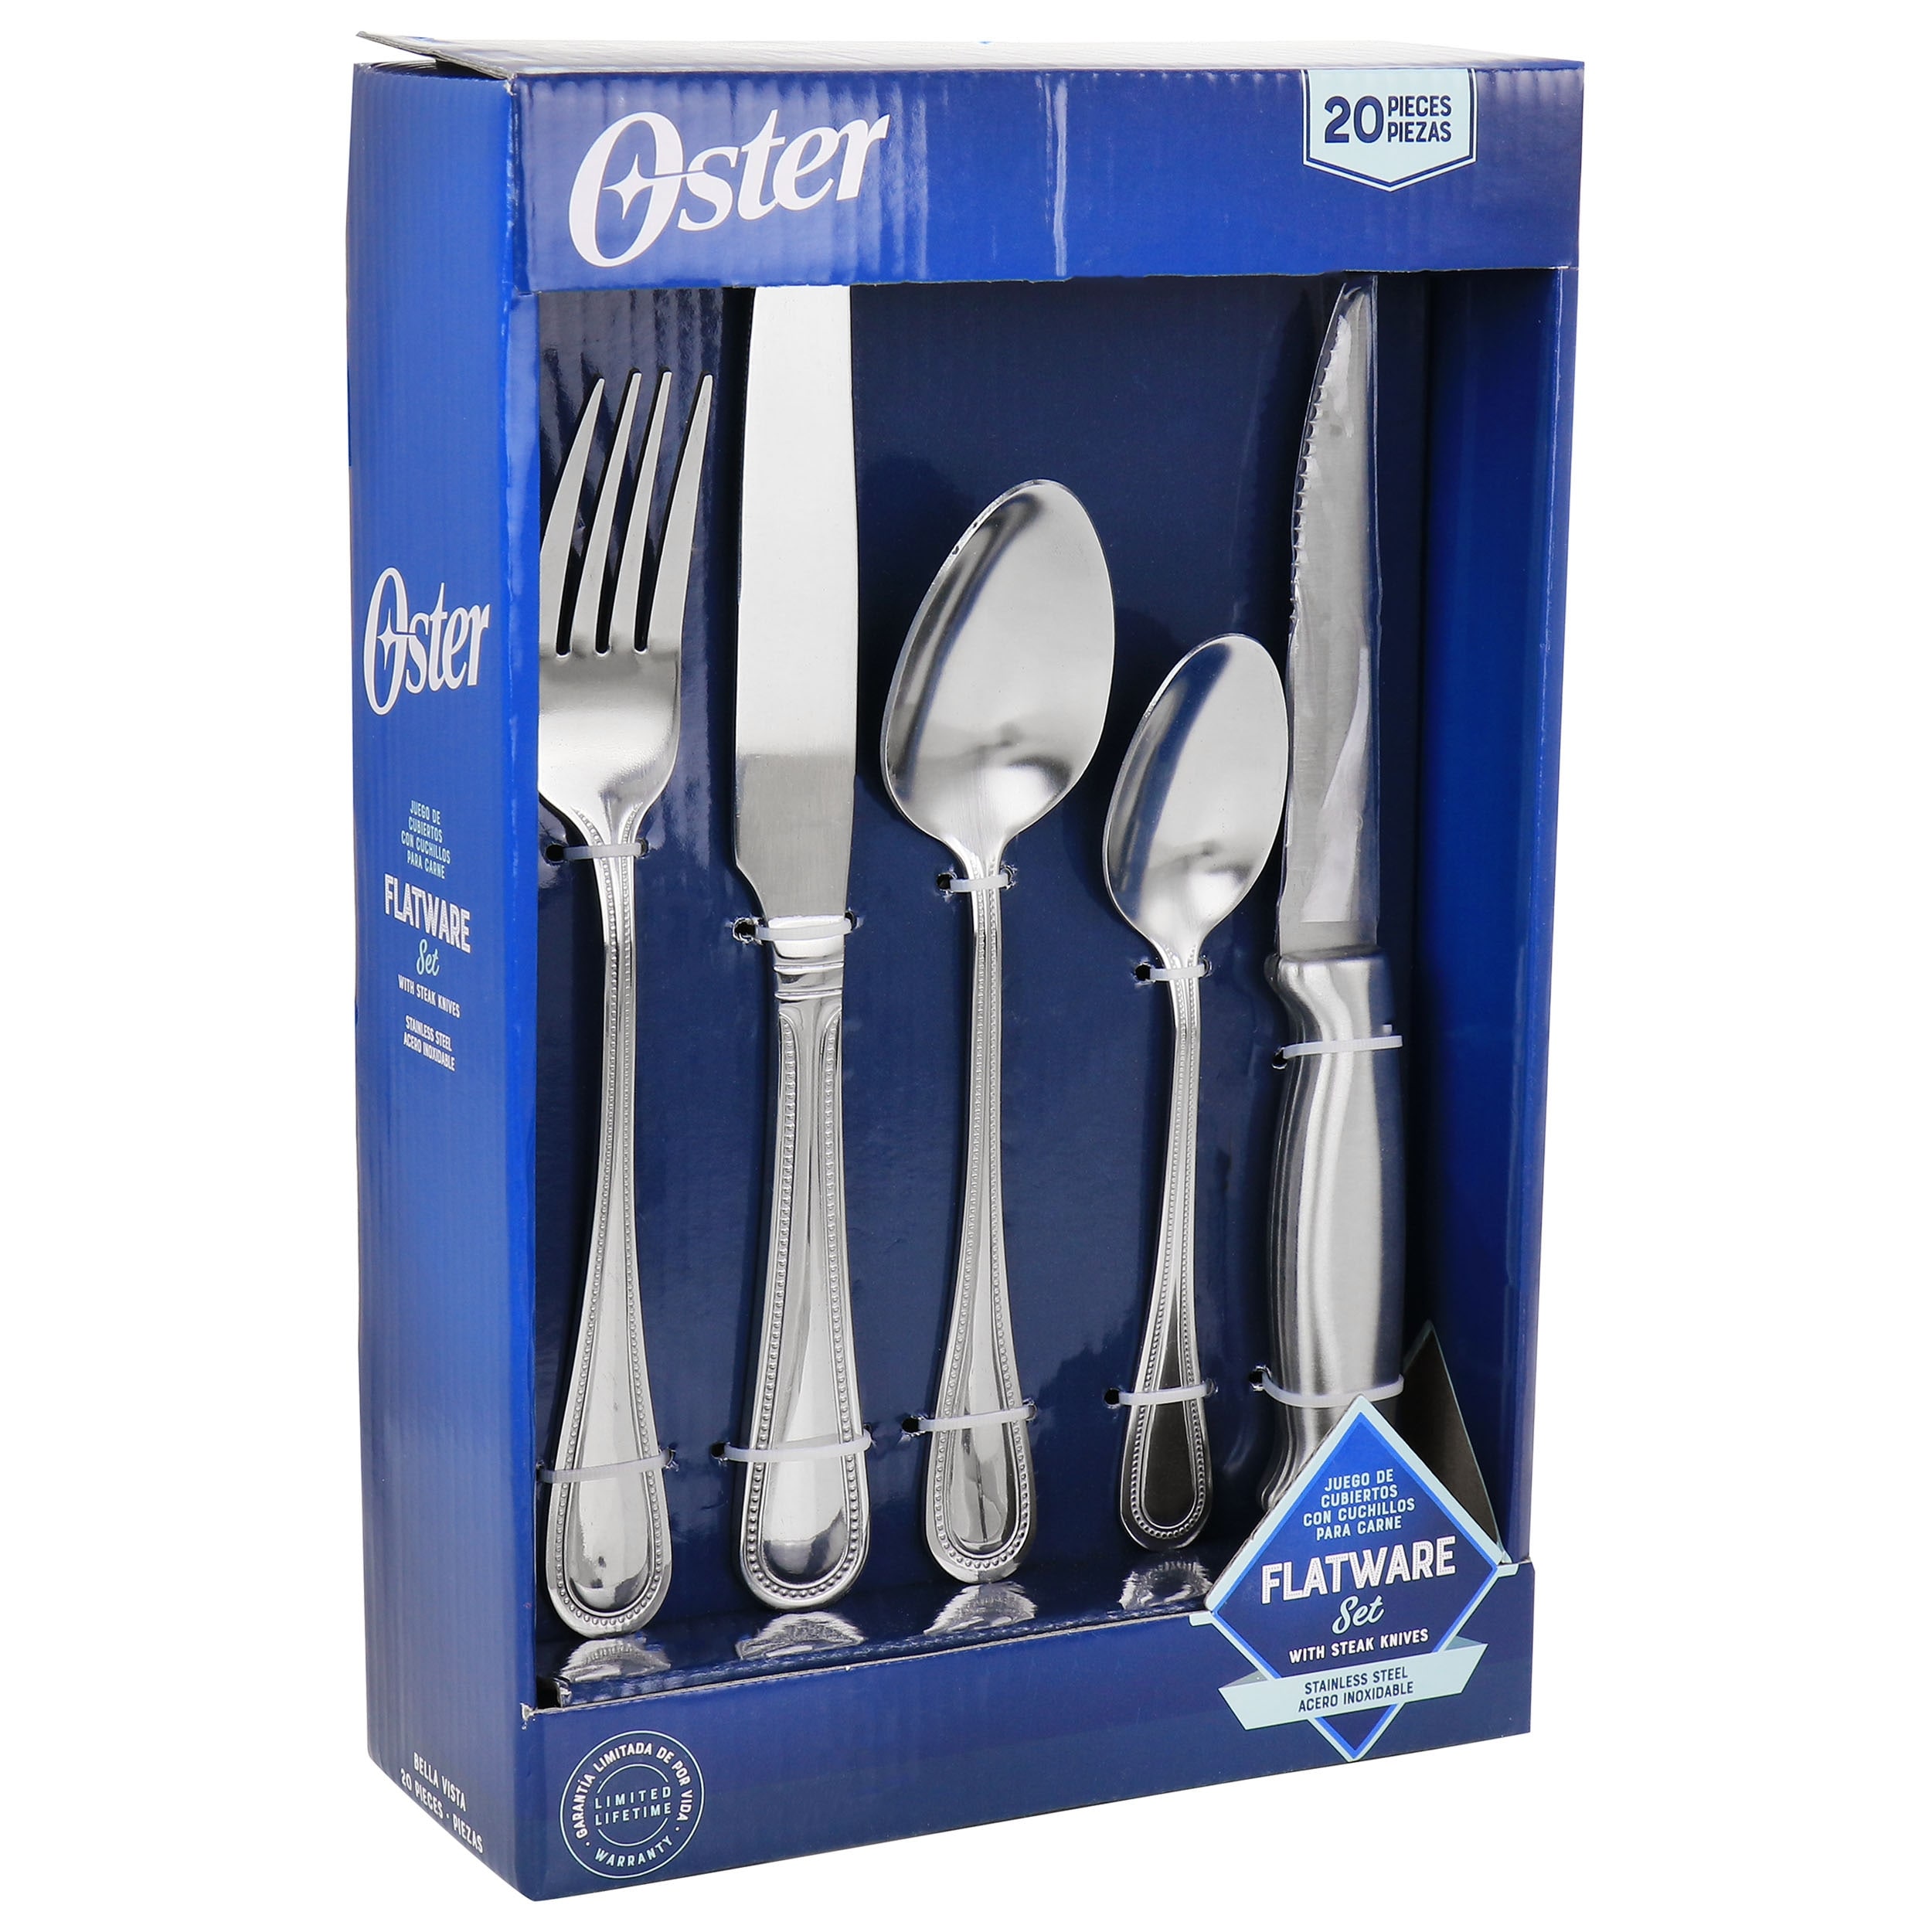 https://ak1.ostkcdn.com/images/products/is/images/direct/4b048700fcbff01ced508e04e05a1c882728cc3f/Oster-20-Piece-Stainless-Steel-Flatware-and-Steak-Knife-Set.jpg